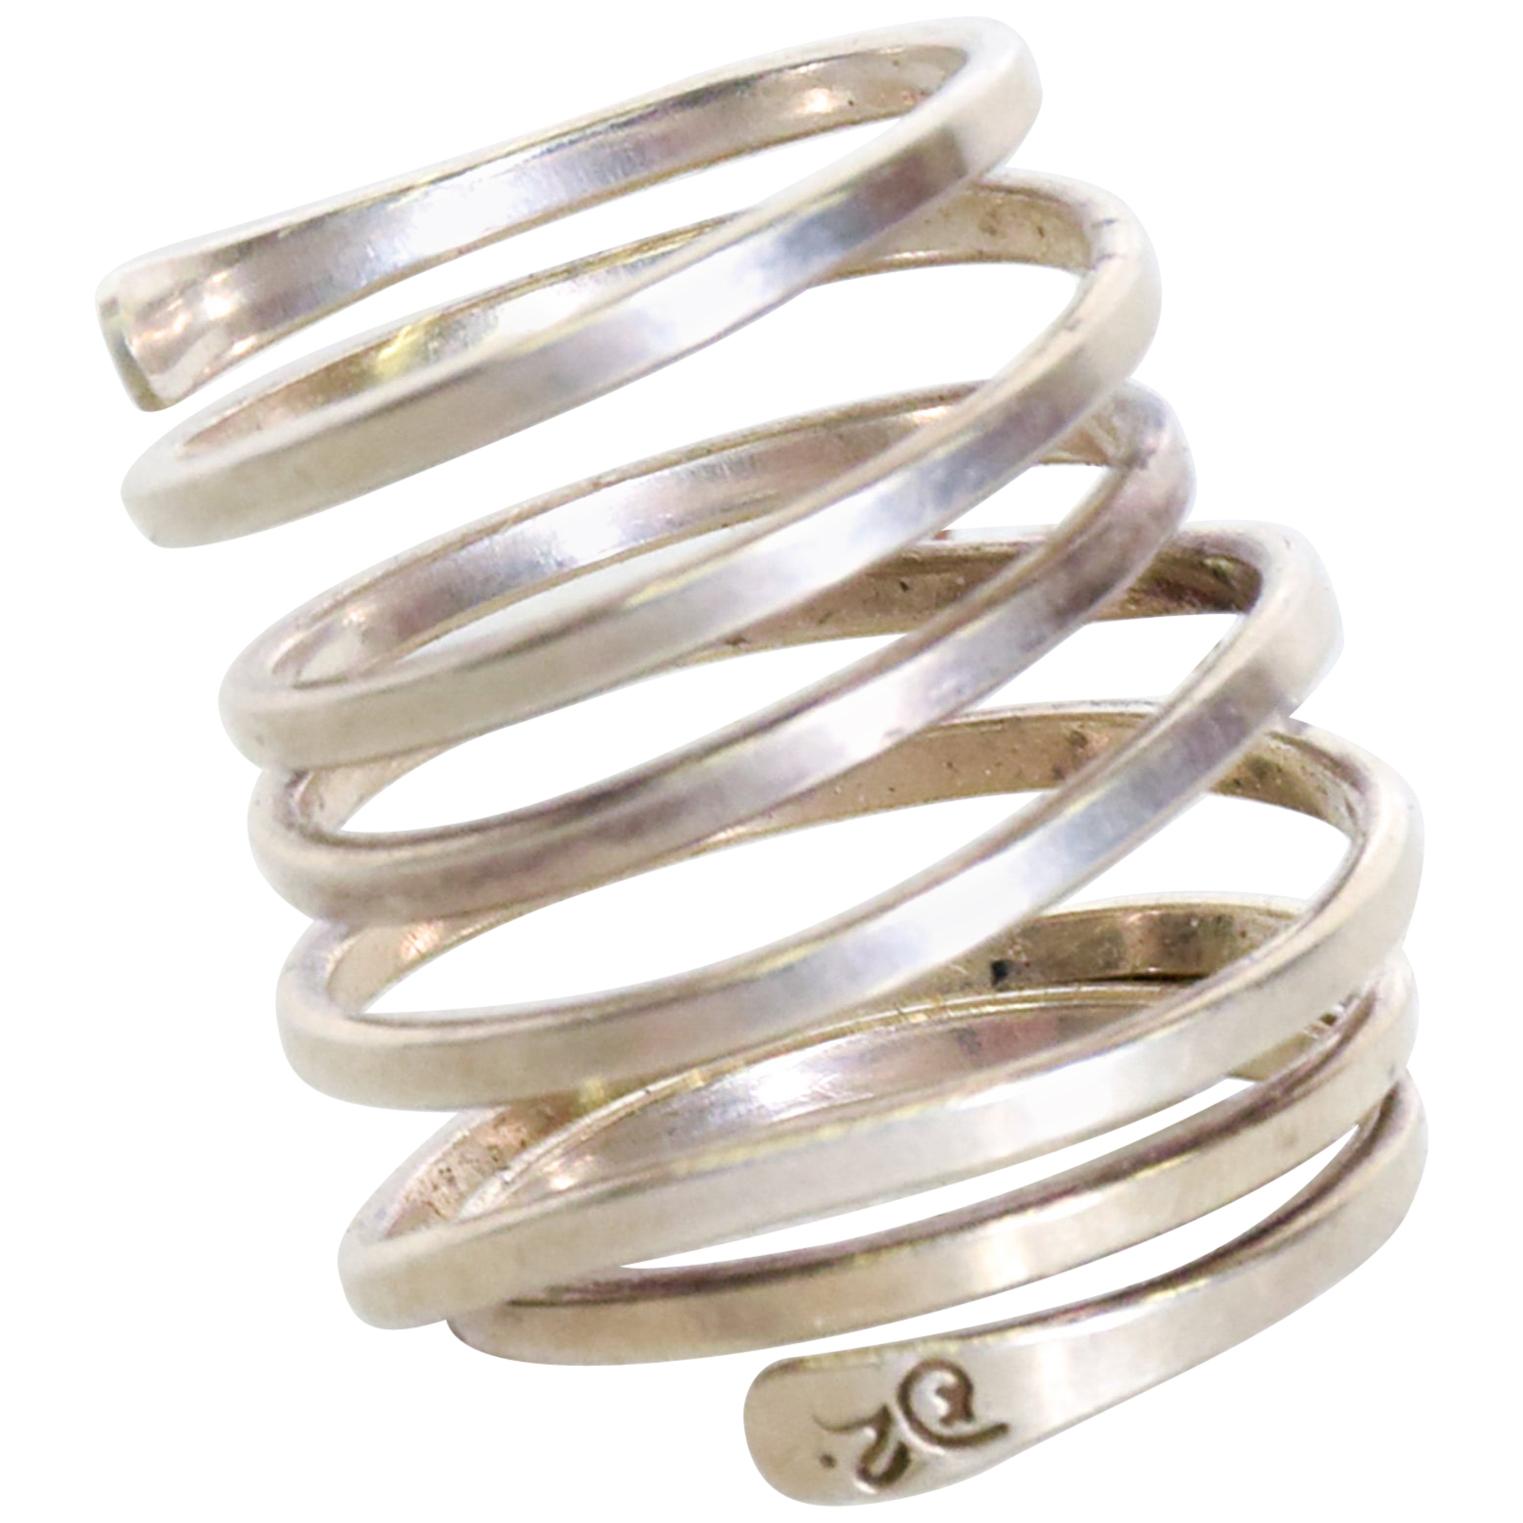 Taxco Sterling Silver Coiled Spiral Wrap Ring 1970s Mexican Modernism